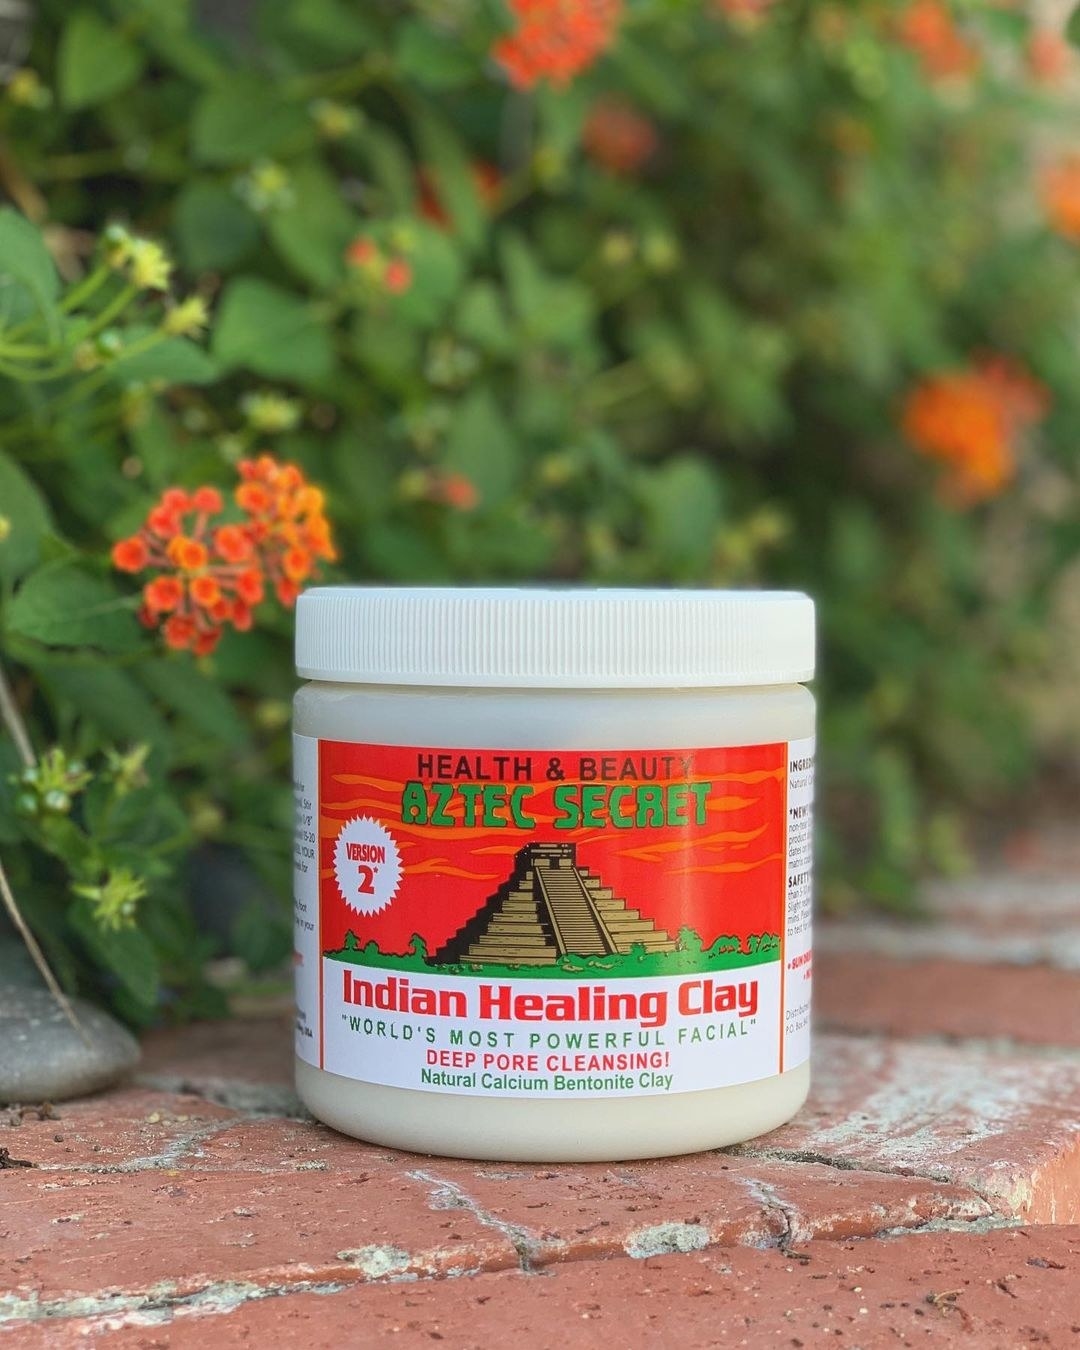 The jar of Indian healing clay